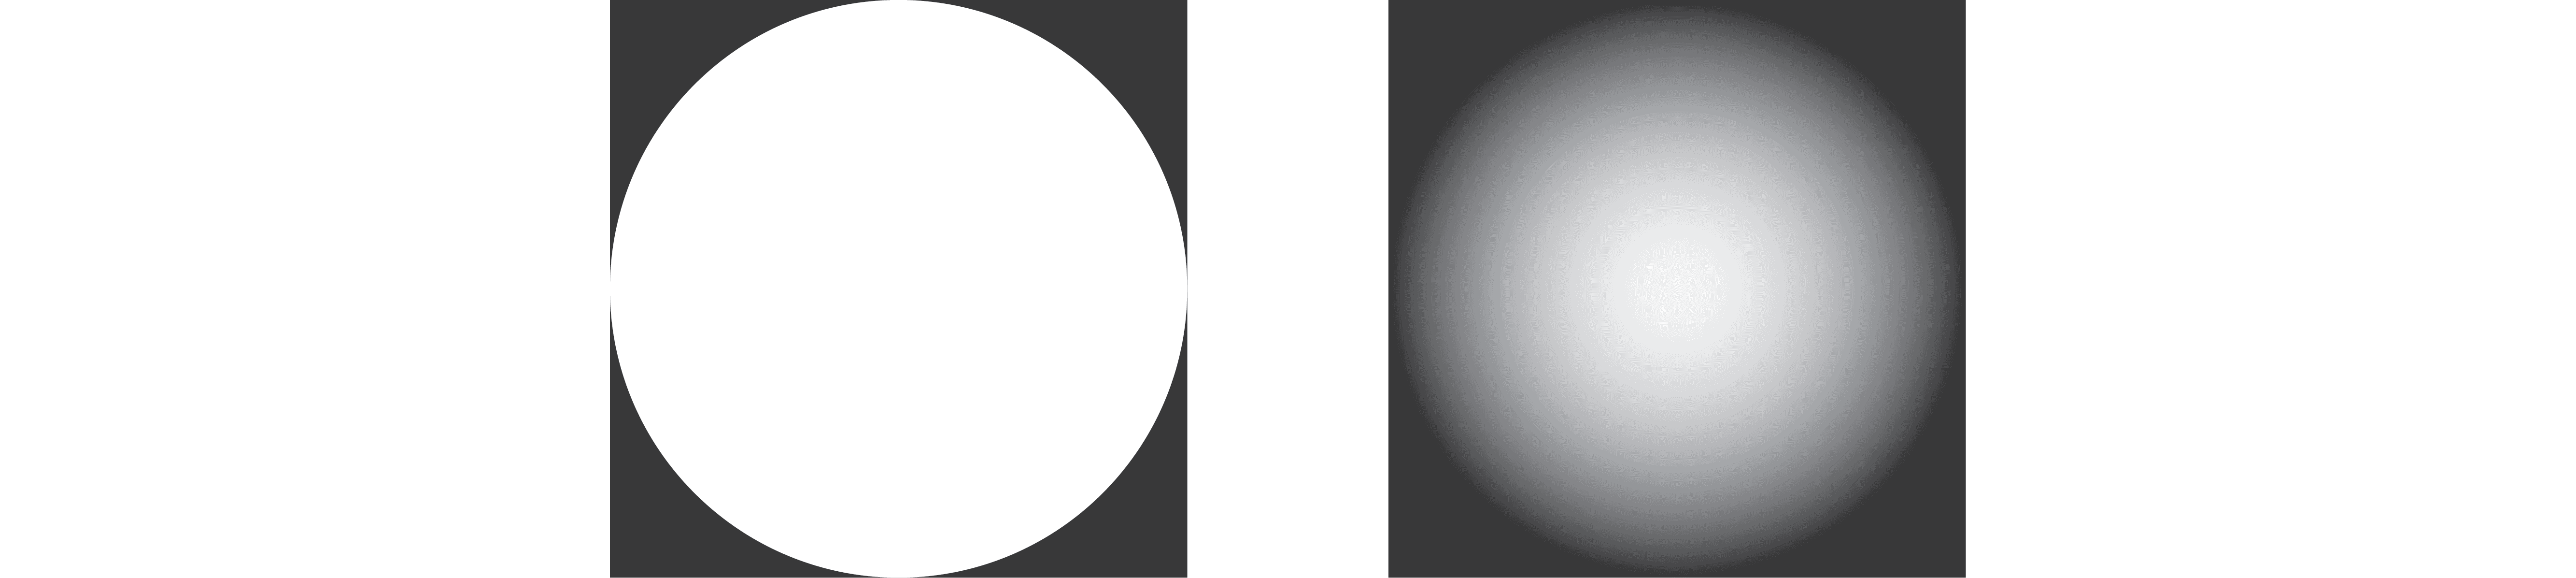 Figure 4.8: Two image textures: an all-white circle (left) and a fuzzy circle that fades out toward the edges (right)